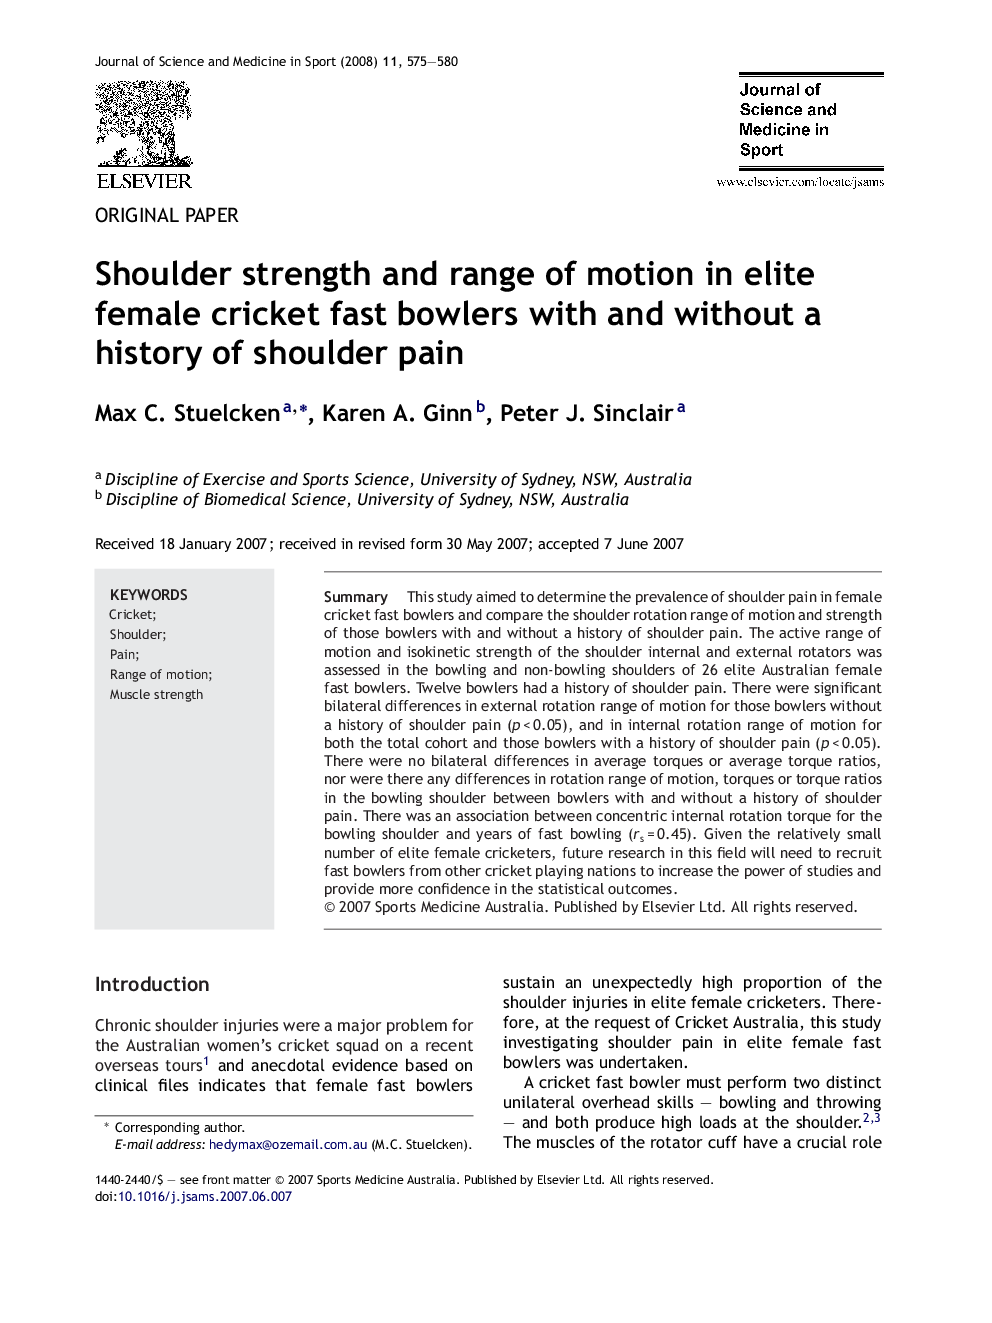 Shoulder strength and range of motion in elite female cricket fast bowlers with and without a history of shoulder pain